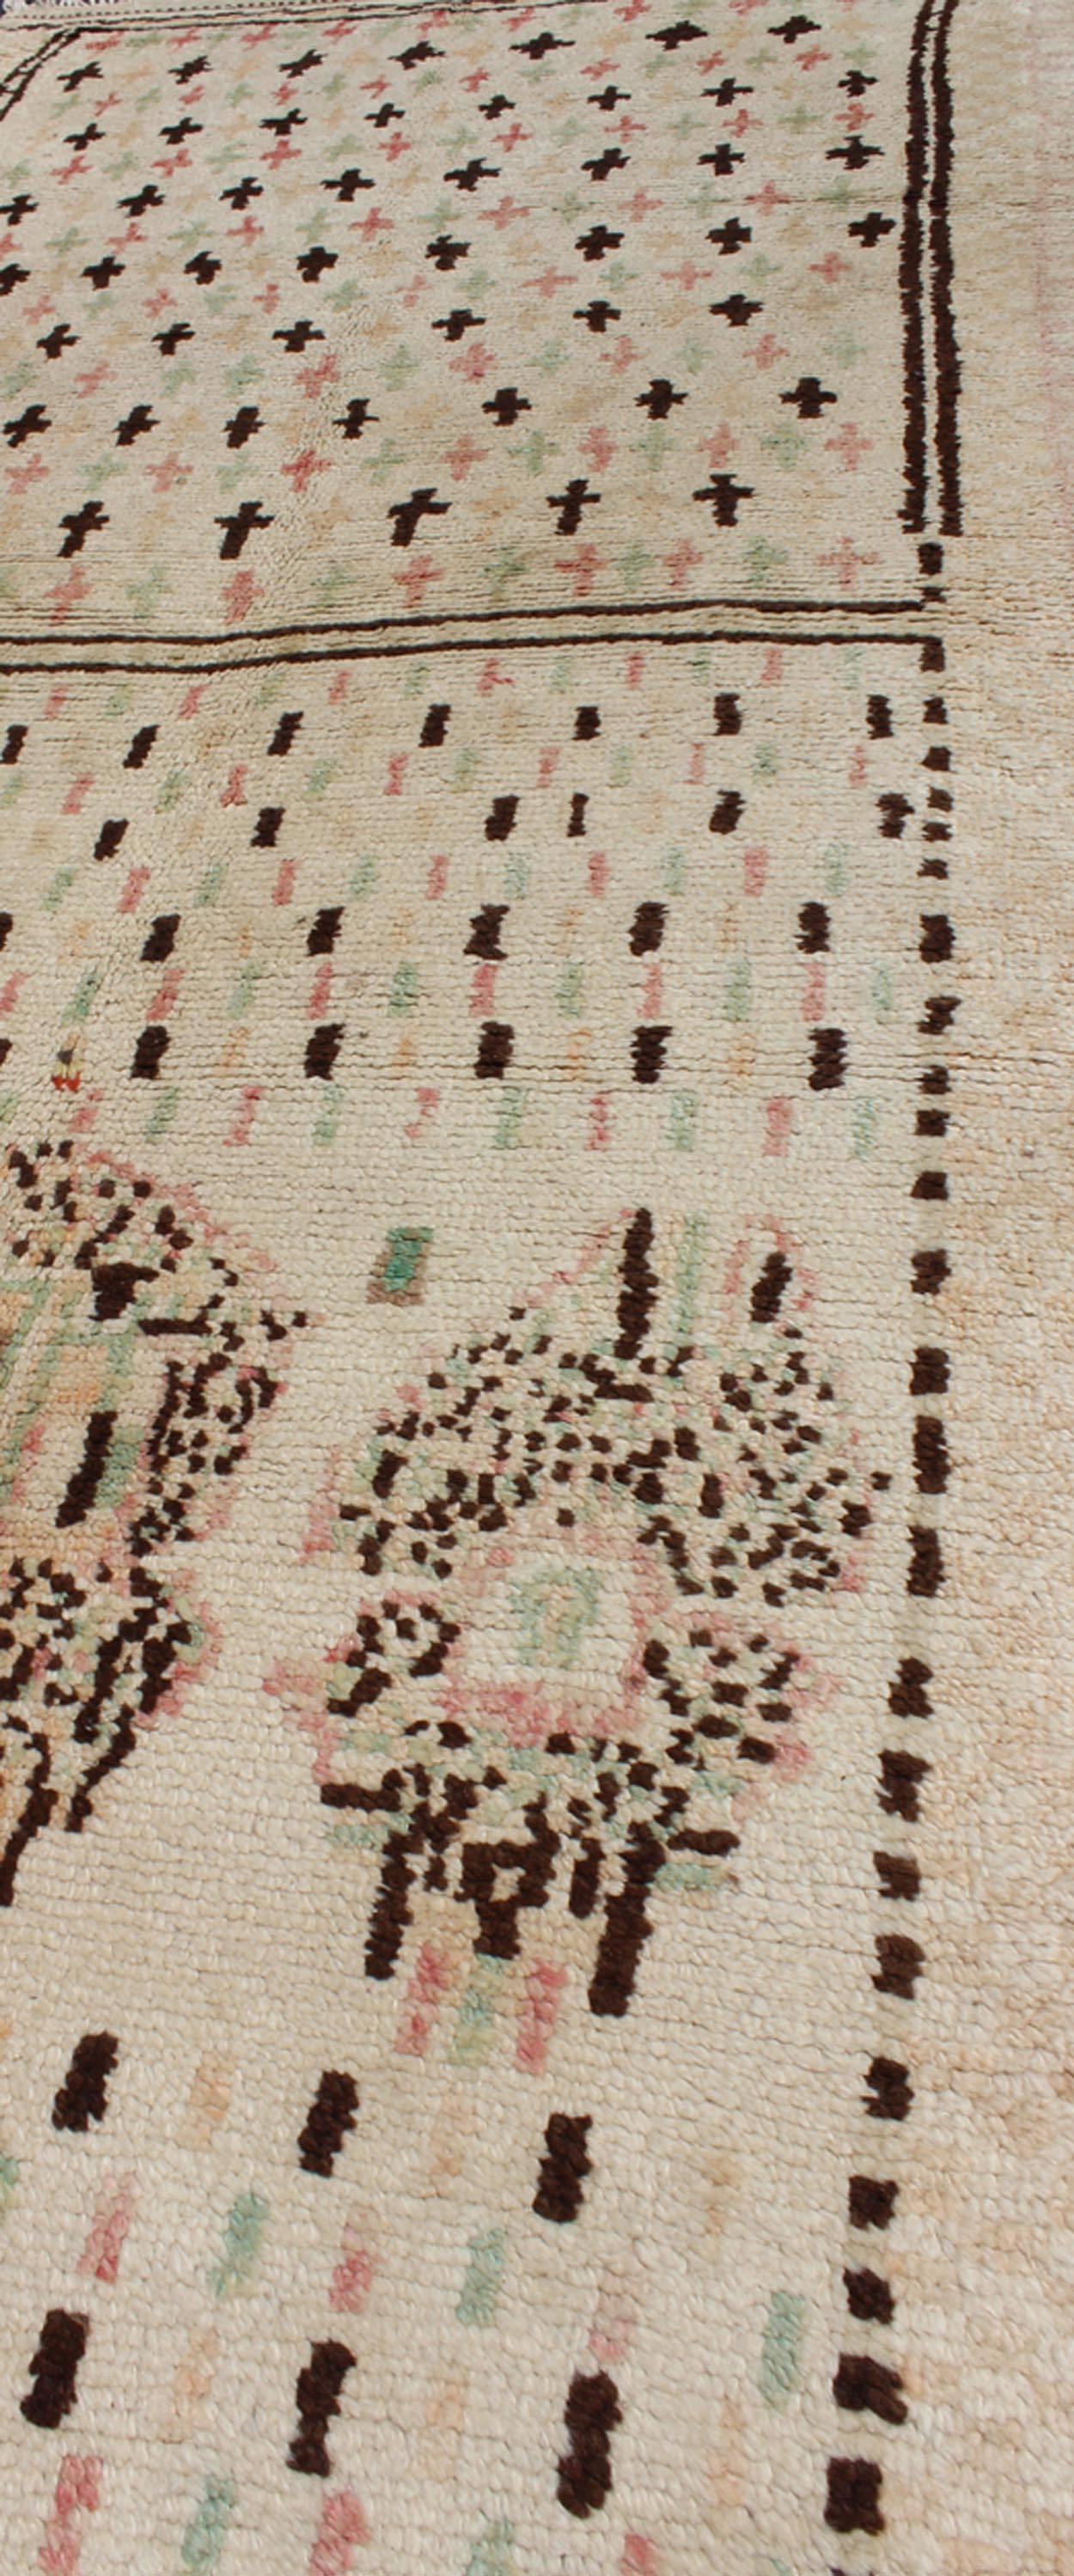 Wool Unique Moroccan Runner in Light Ivory Background & Brown, Rose, Green Accents